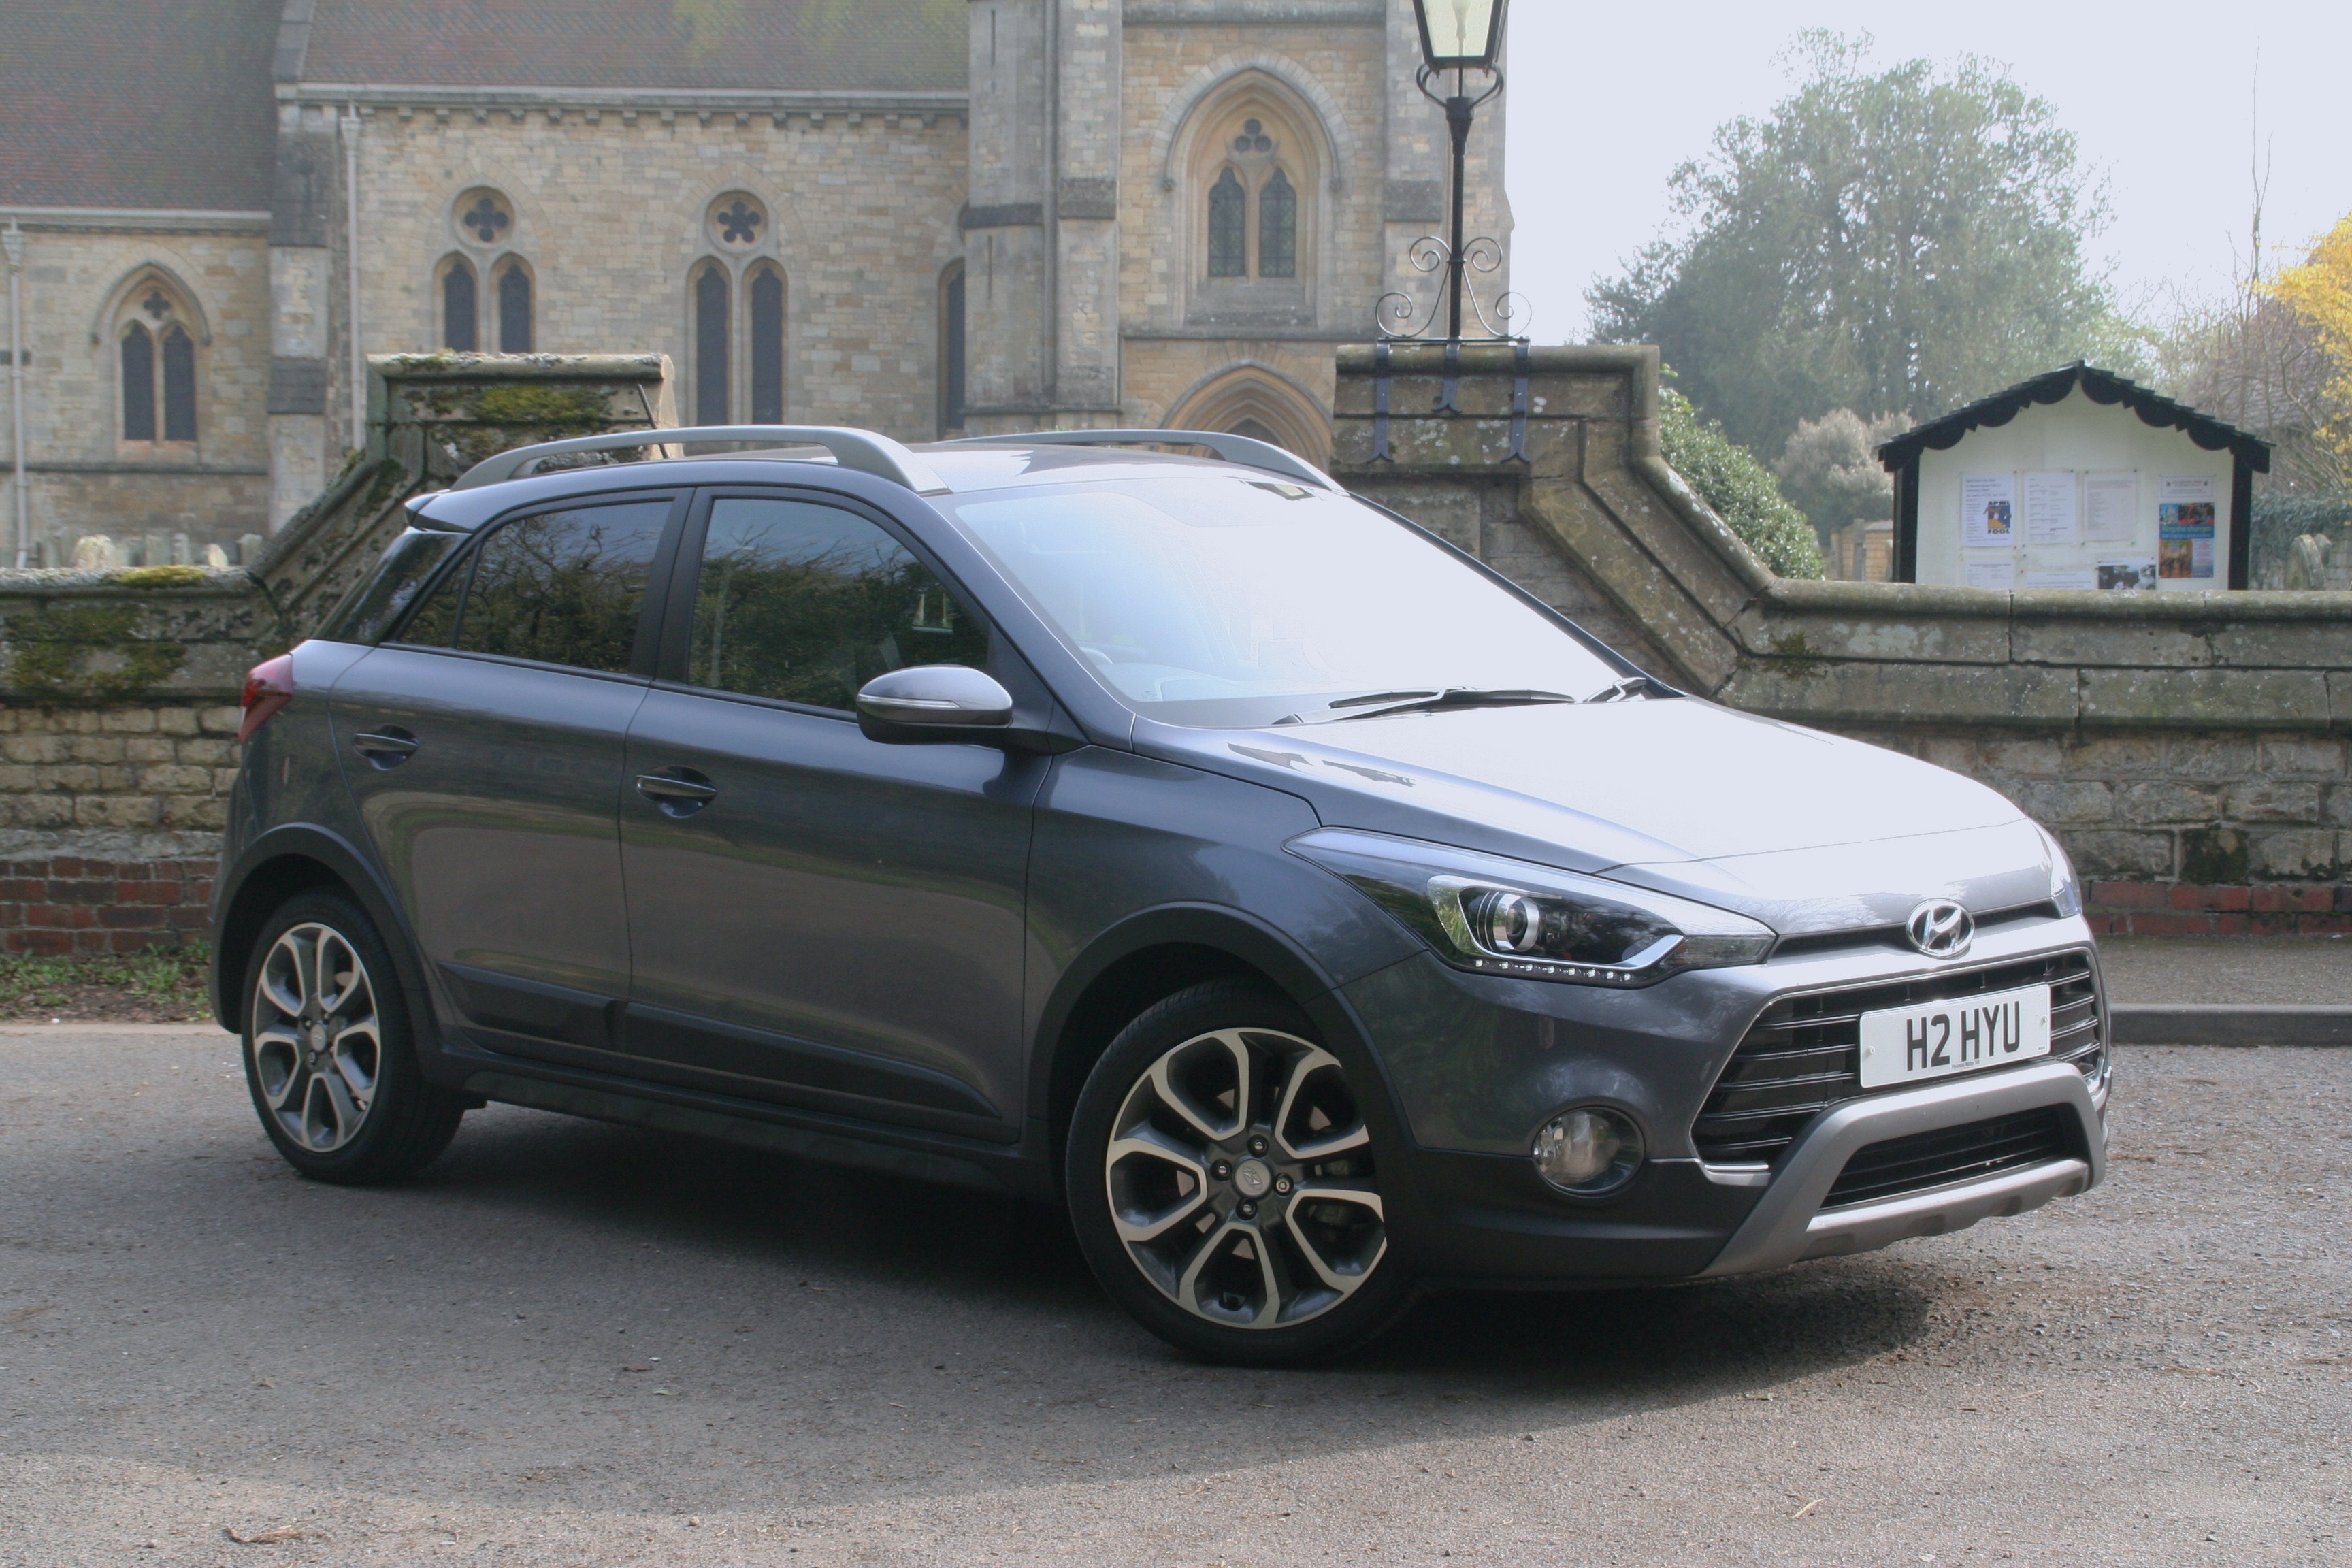 When the hammer falls, cost-efficiency will win all for Hyundai’s cheery i20 Active